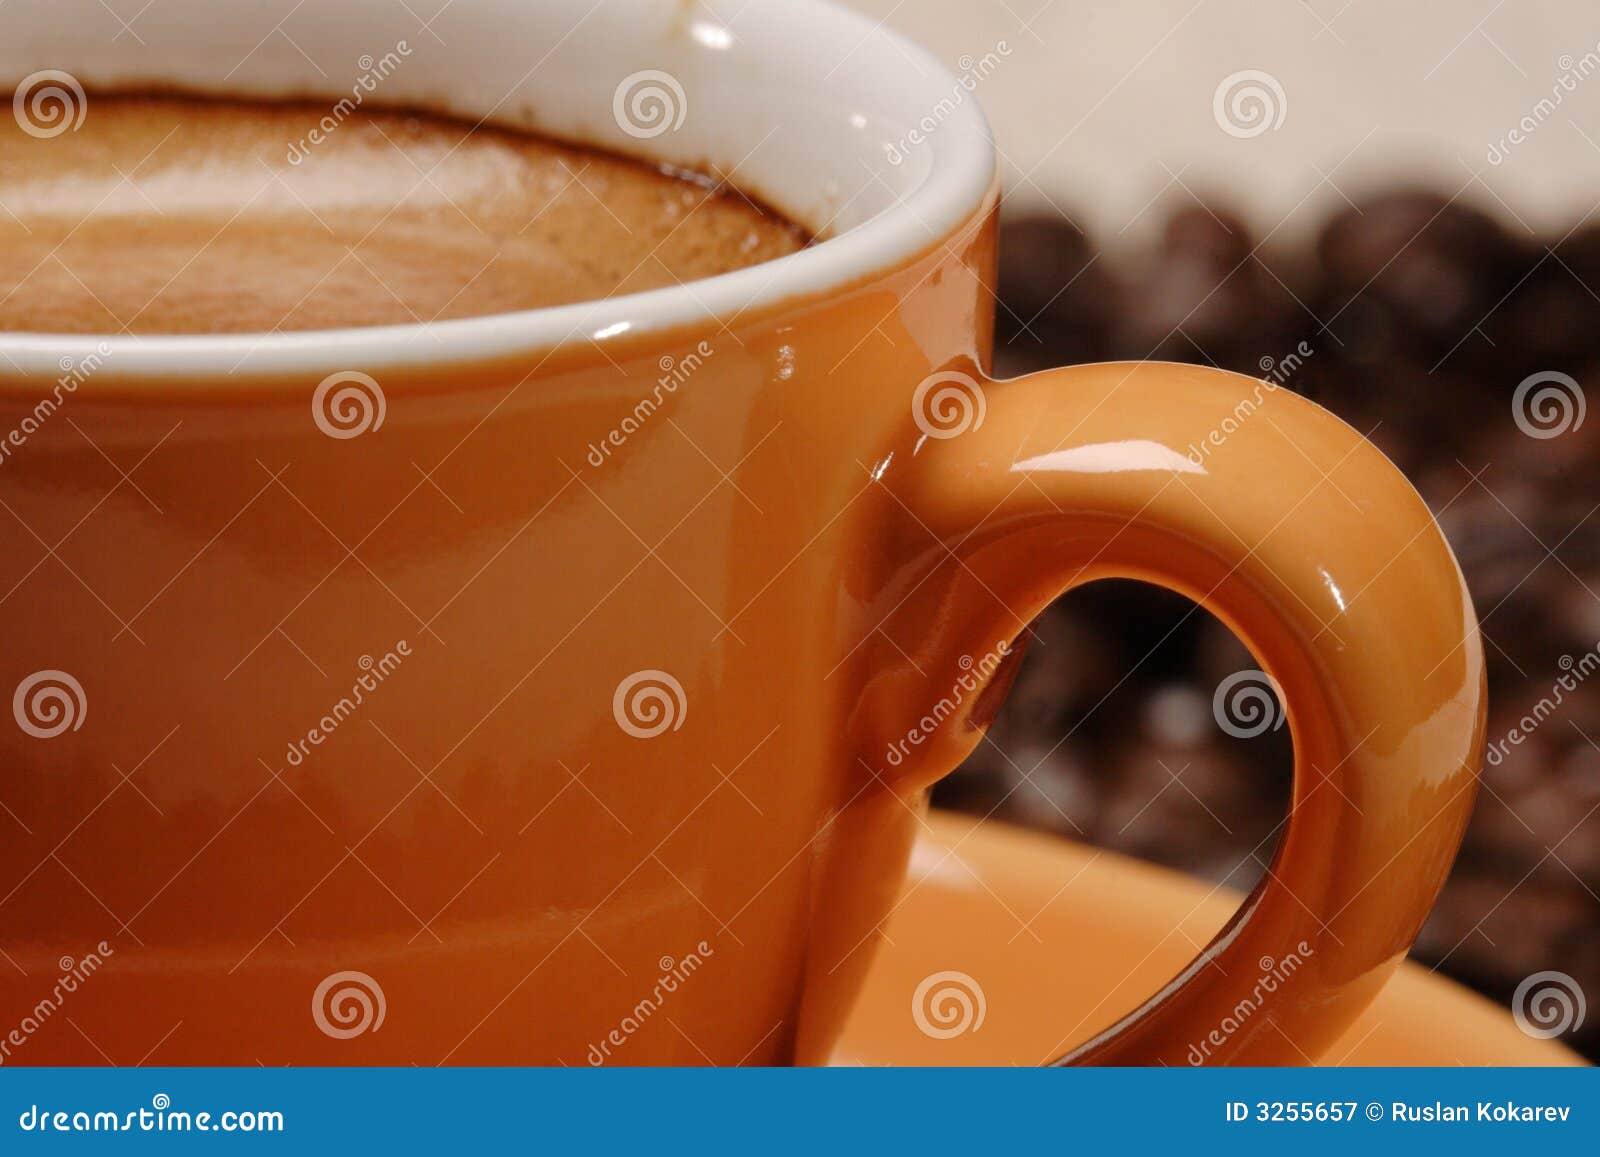 Cup of coffee stock image. Image of ceramic, faience, glazed - 3255657